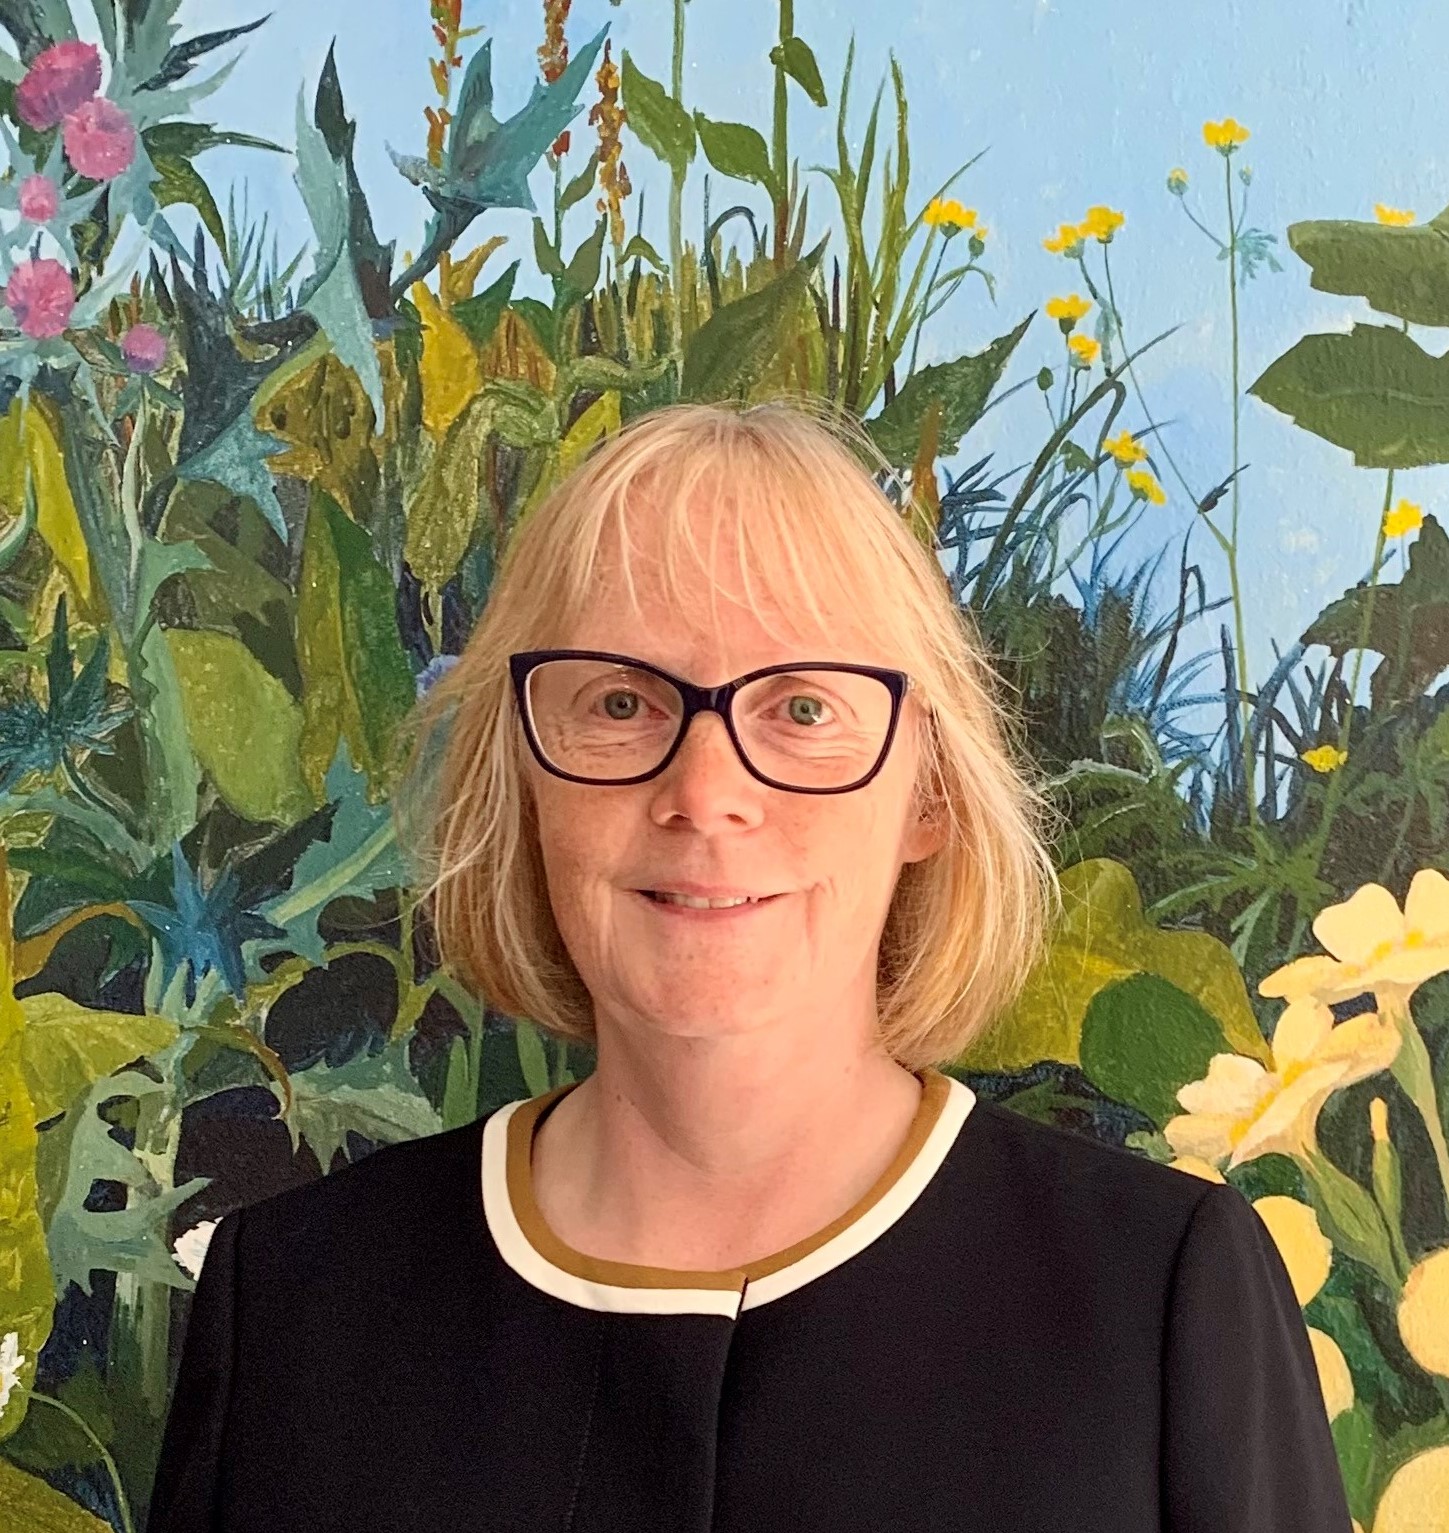 Helen Budge standing against a floral background. She is wearing dark rimmed glasses and smiling at the camera